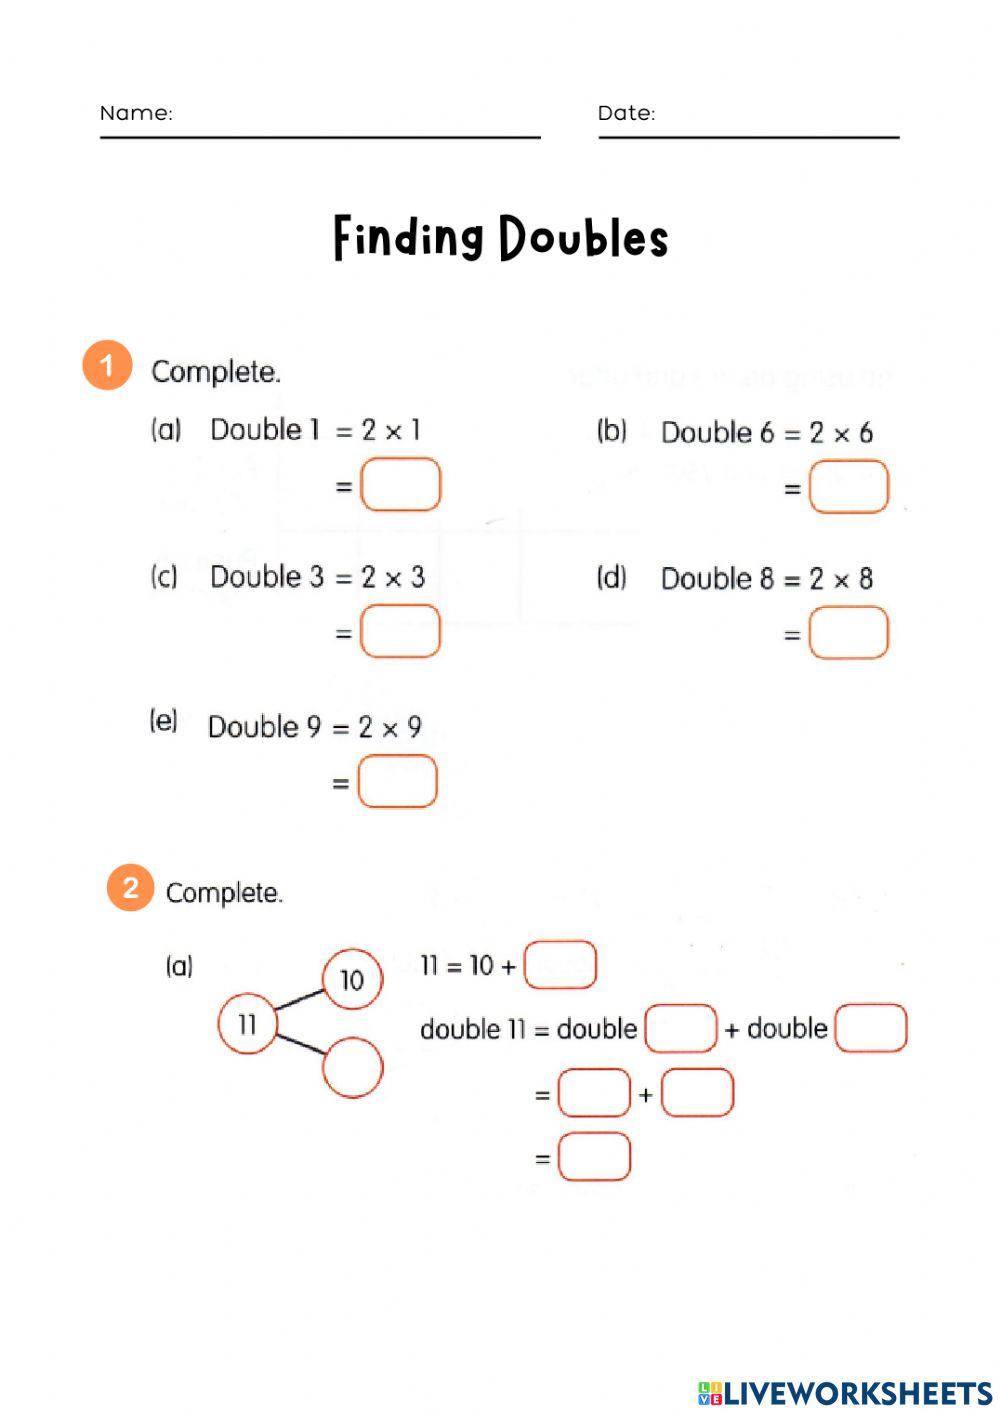 Finding Doubles